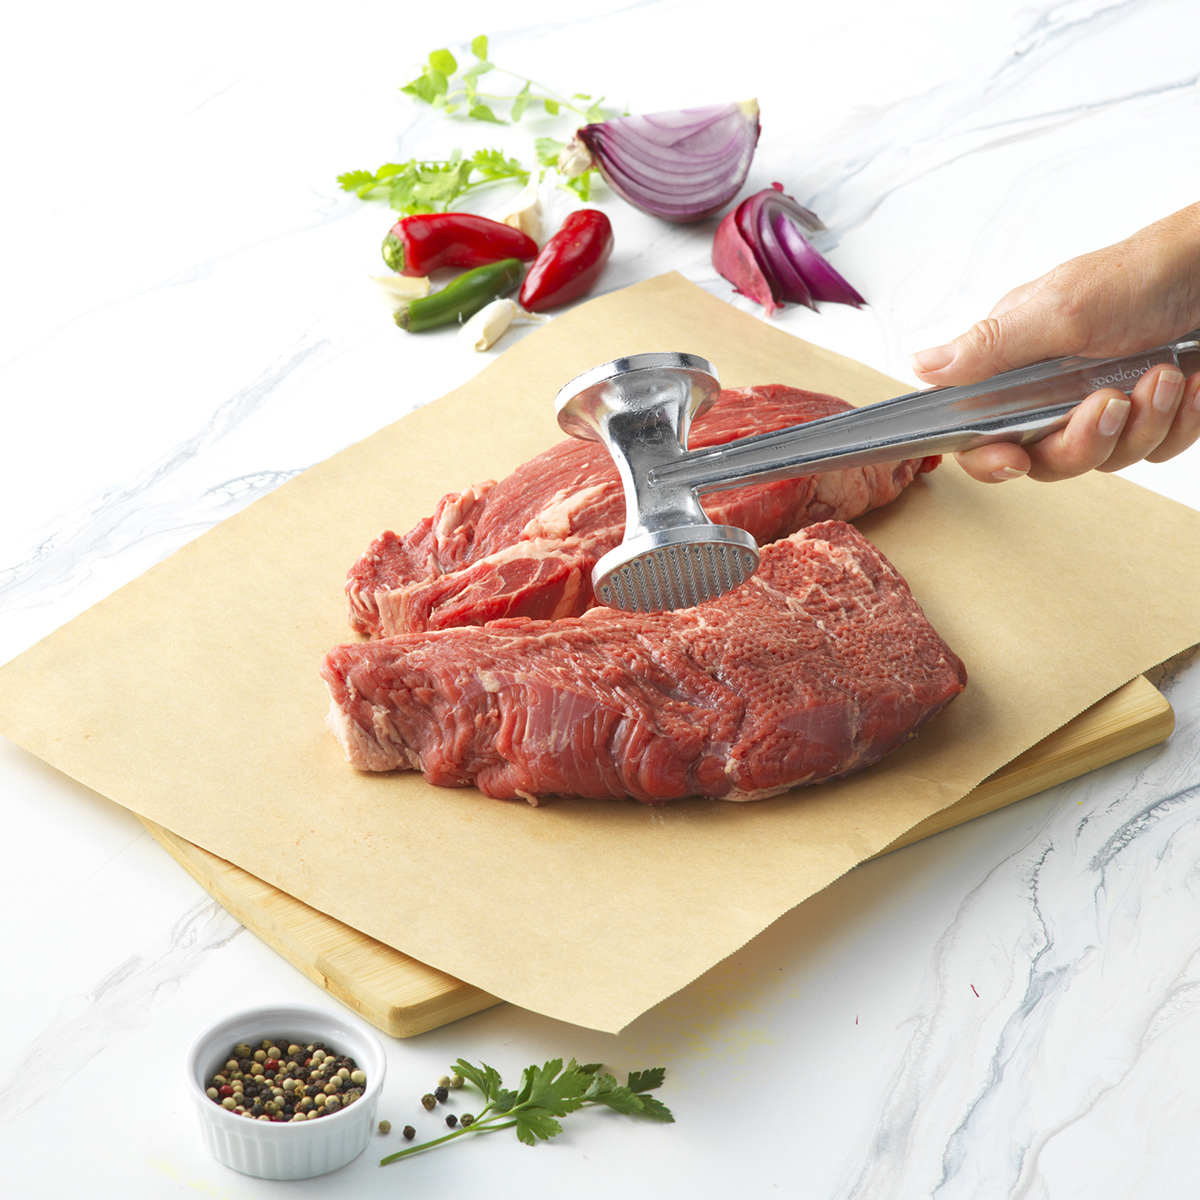 https://www.goodcook.com/media/catalog/product/2/0/20016_goodcook_two-sided_meat_tenderizer_lifestyle.jpg?auto=webp&format=pjpg